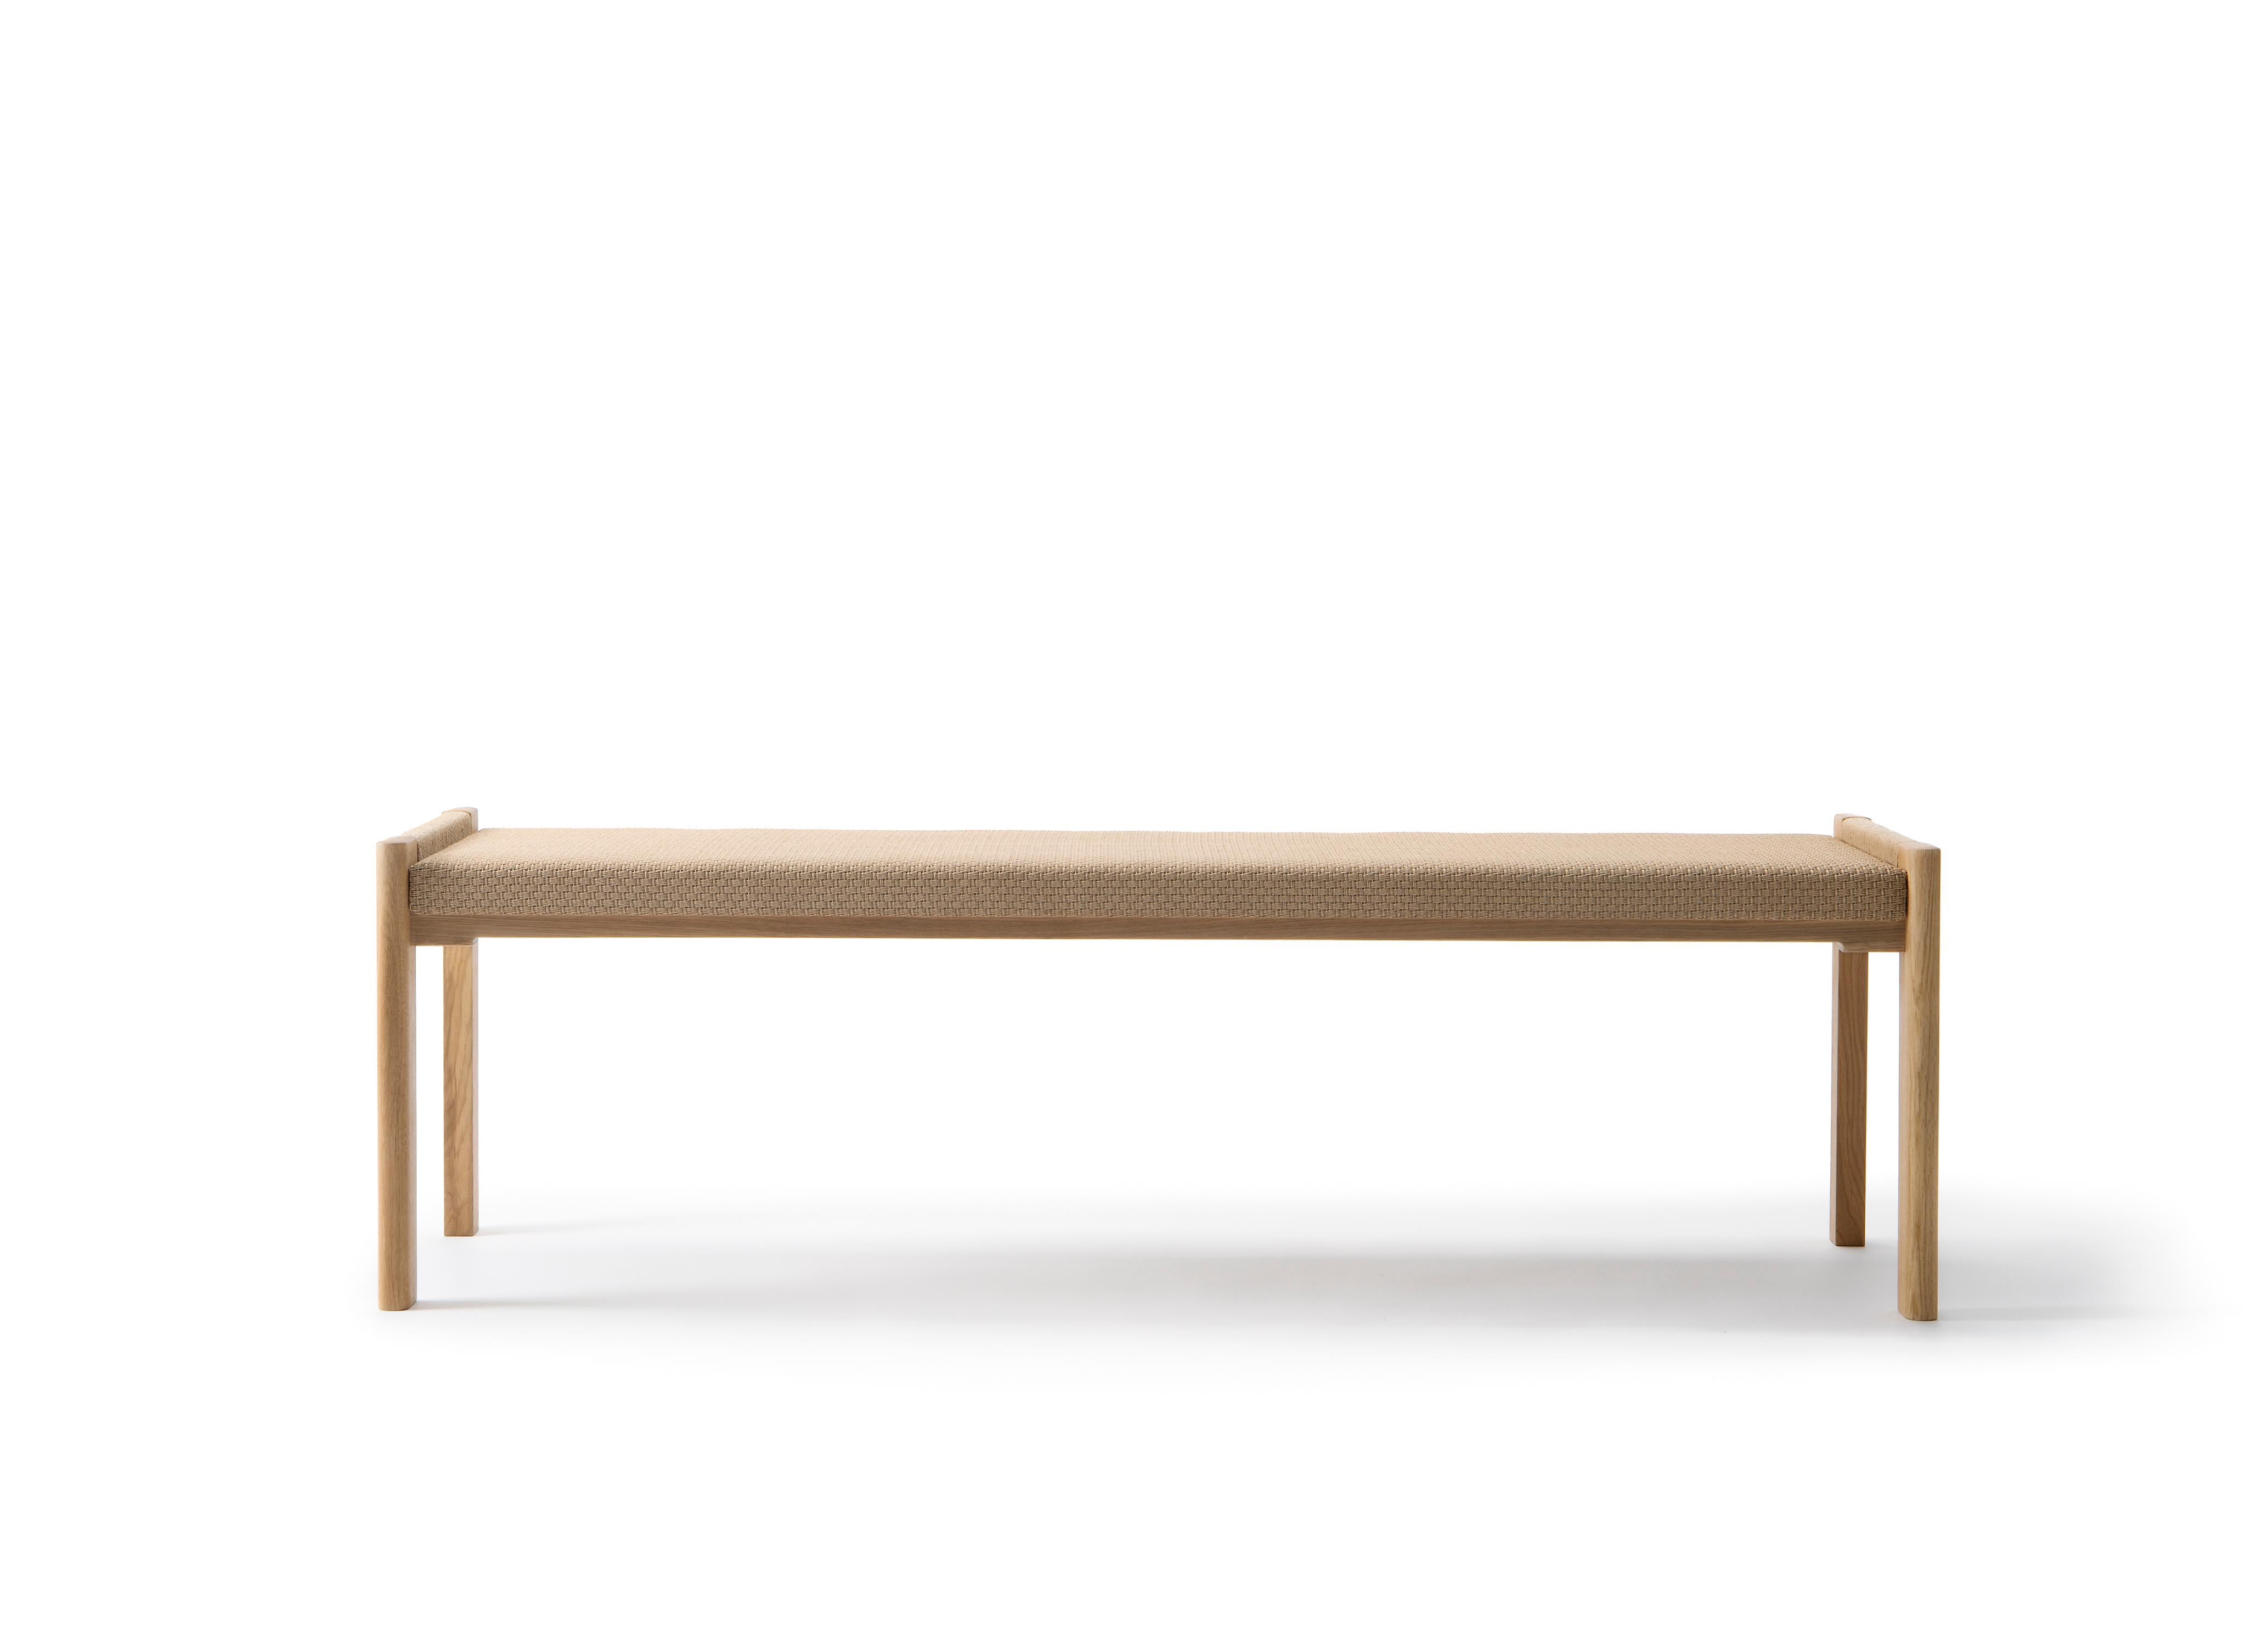 Detalji (“detail” in Finnish) bench (designed 2021) is made following the traditional Nikari craftsmanship solutions, accompanied with delicate Woodnotes paper yarn fabric “Woodpecker”, designed by Ritva Puotila. Paper yarn is also used separately